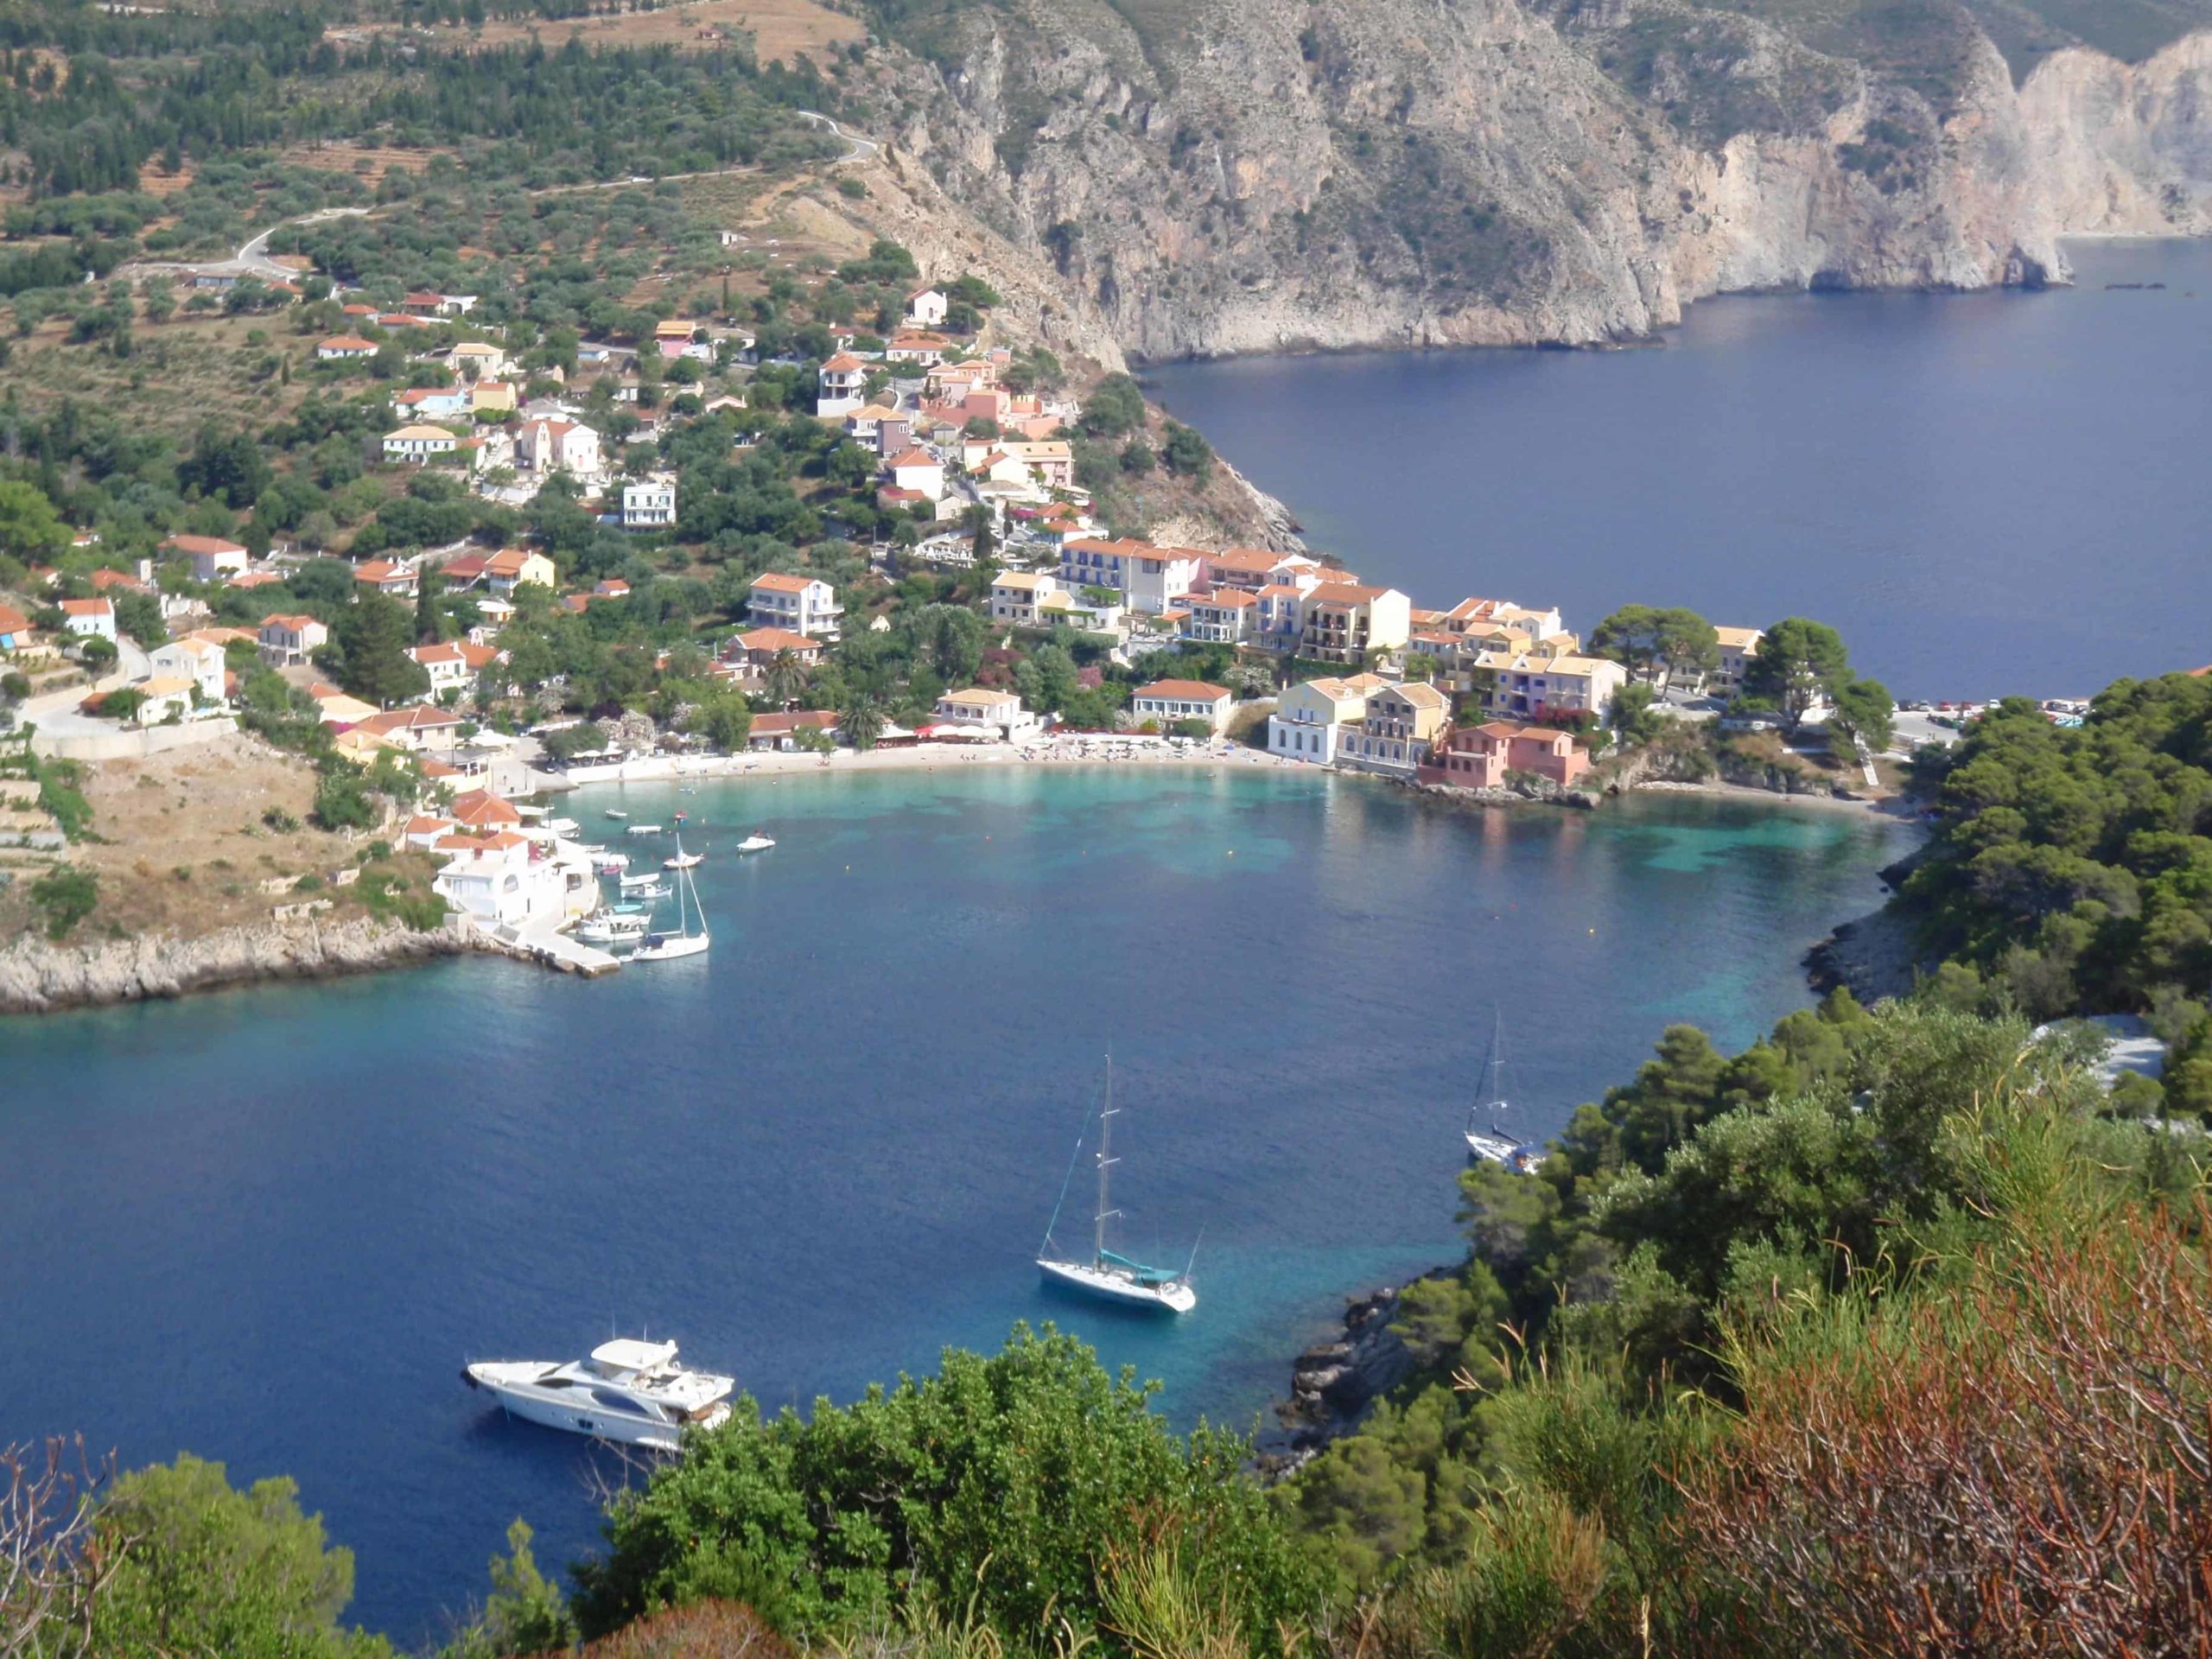 Looking down at the yachts in Assos bay